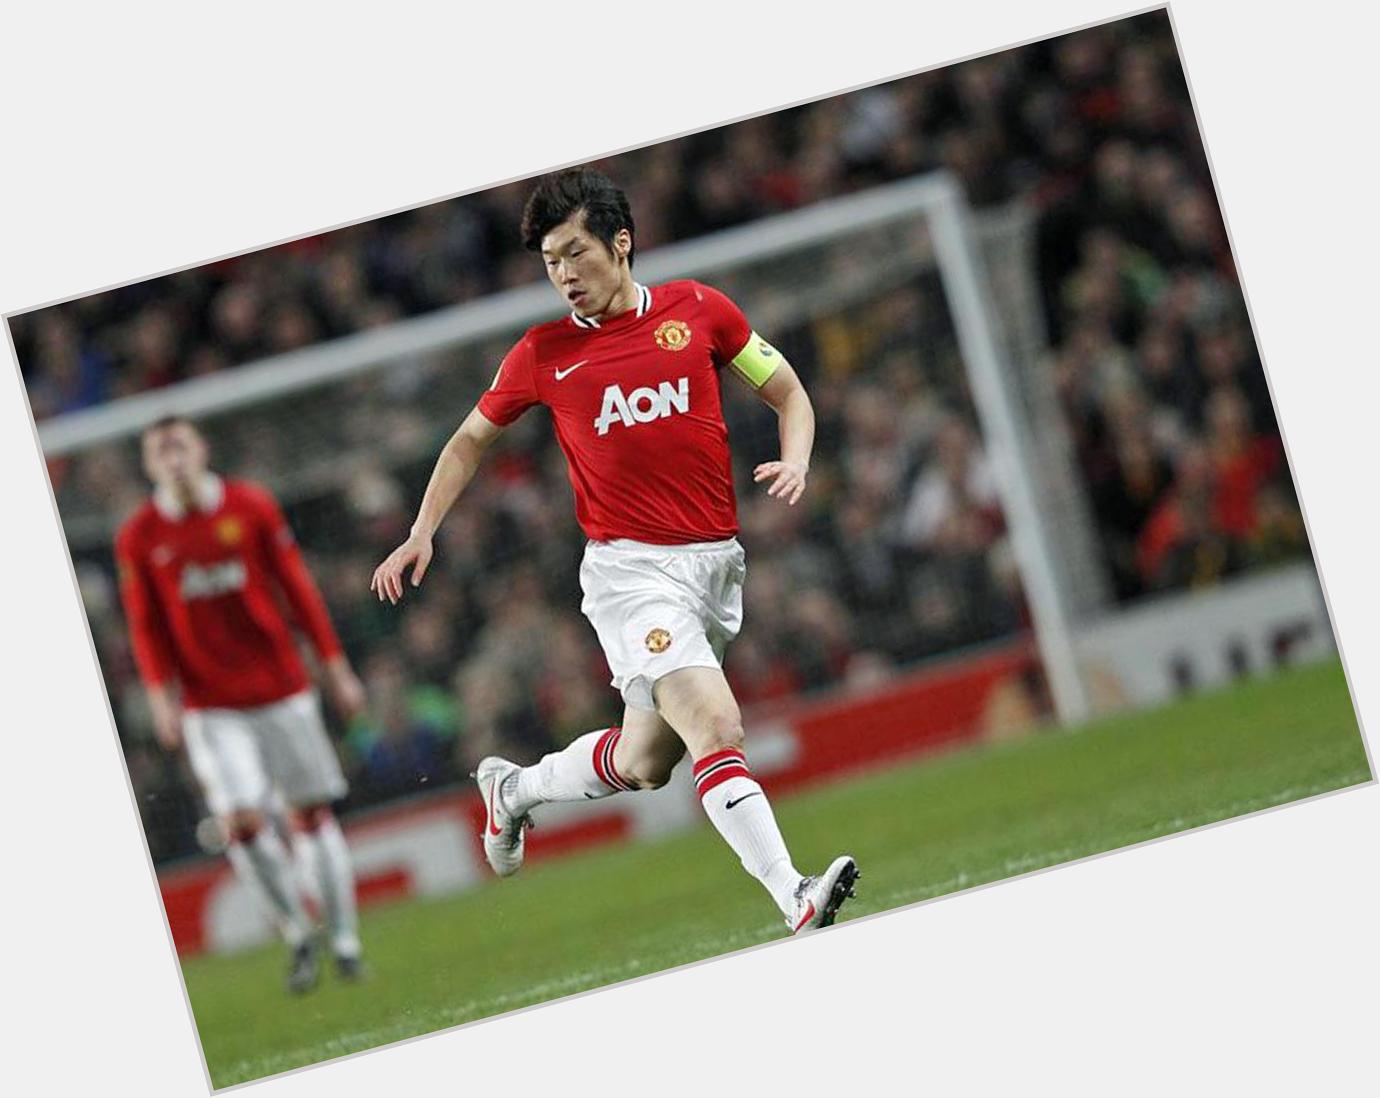 Happy birthday for the first Asian footballer who won EPL- UCL- FIFA Club World Cup Trophy, Park Ji Sung! 